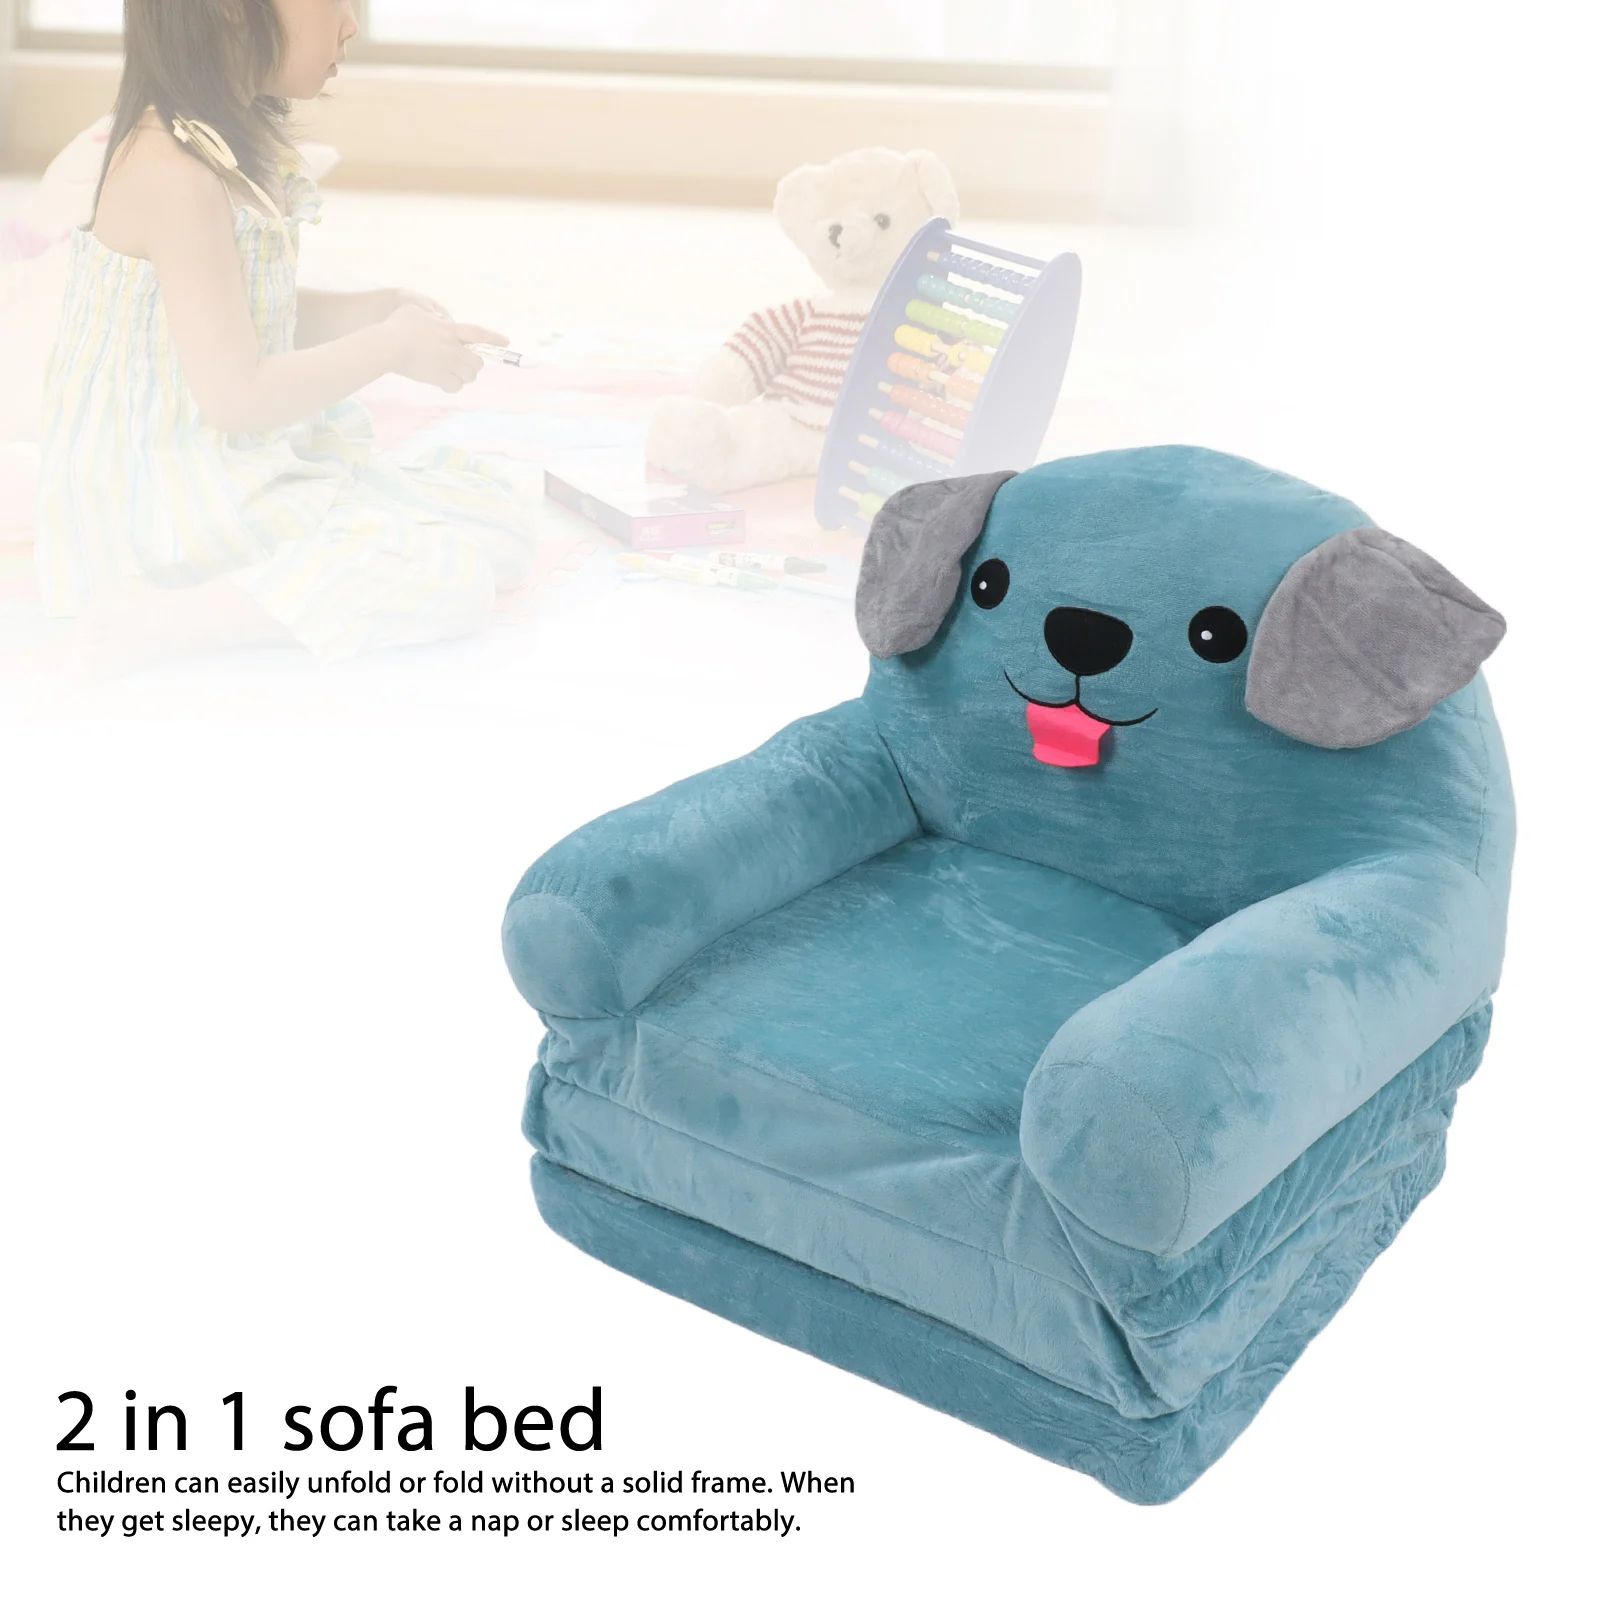 Children Sofa Blue Puppy Children's Sofa Cute Cartoon Folding Small Sofa Bed  Dual Use Child Bean Bag For Kids – Aliexpress With Regard To 2 In 1 Foldable Children's Sofa Beds (Photo 5 of 15)